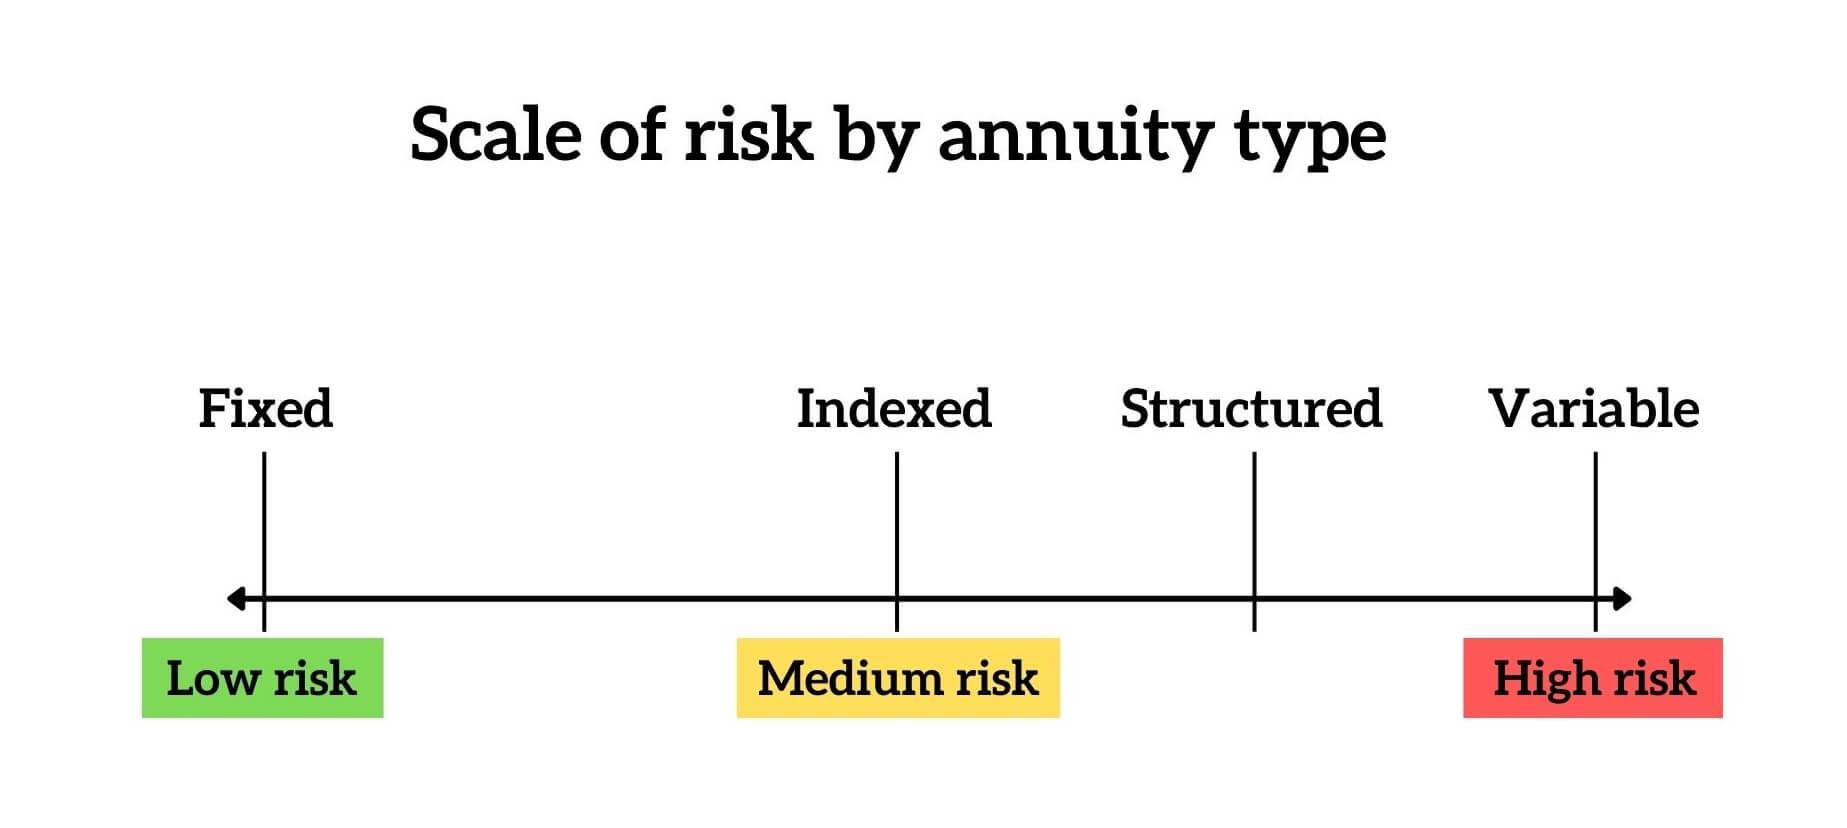 Visual representation of different annuity types and risks